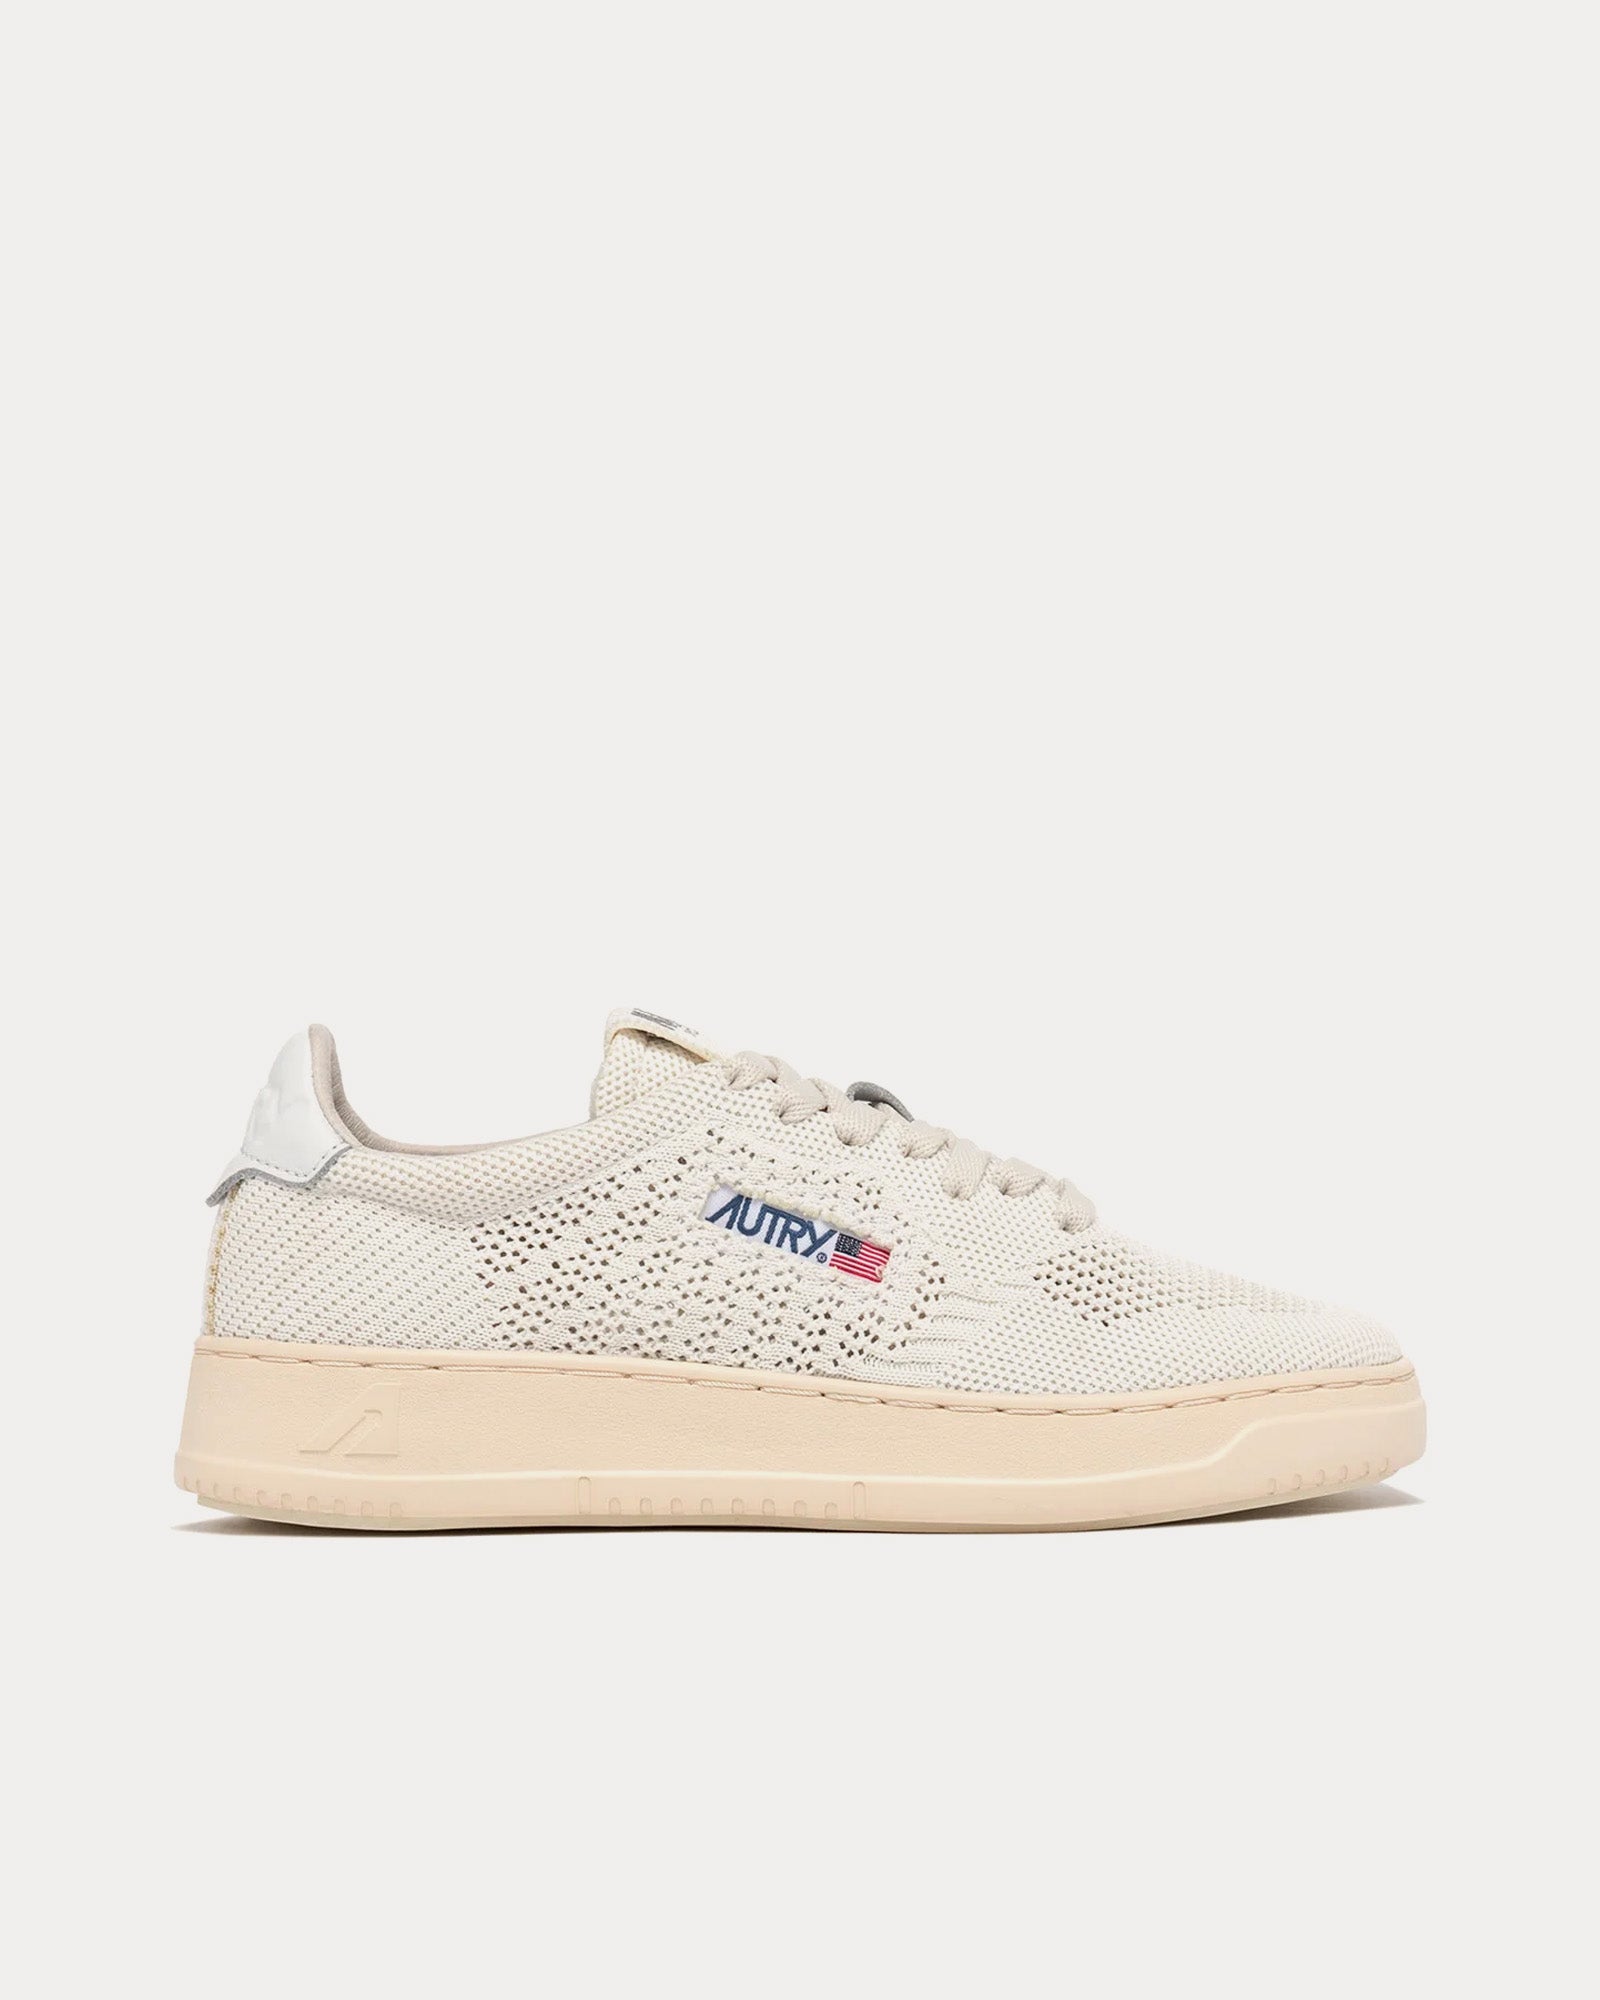 Autry - Easeknit Medalist Ivory Low Top Sneakers